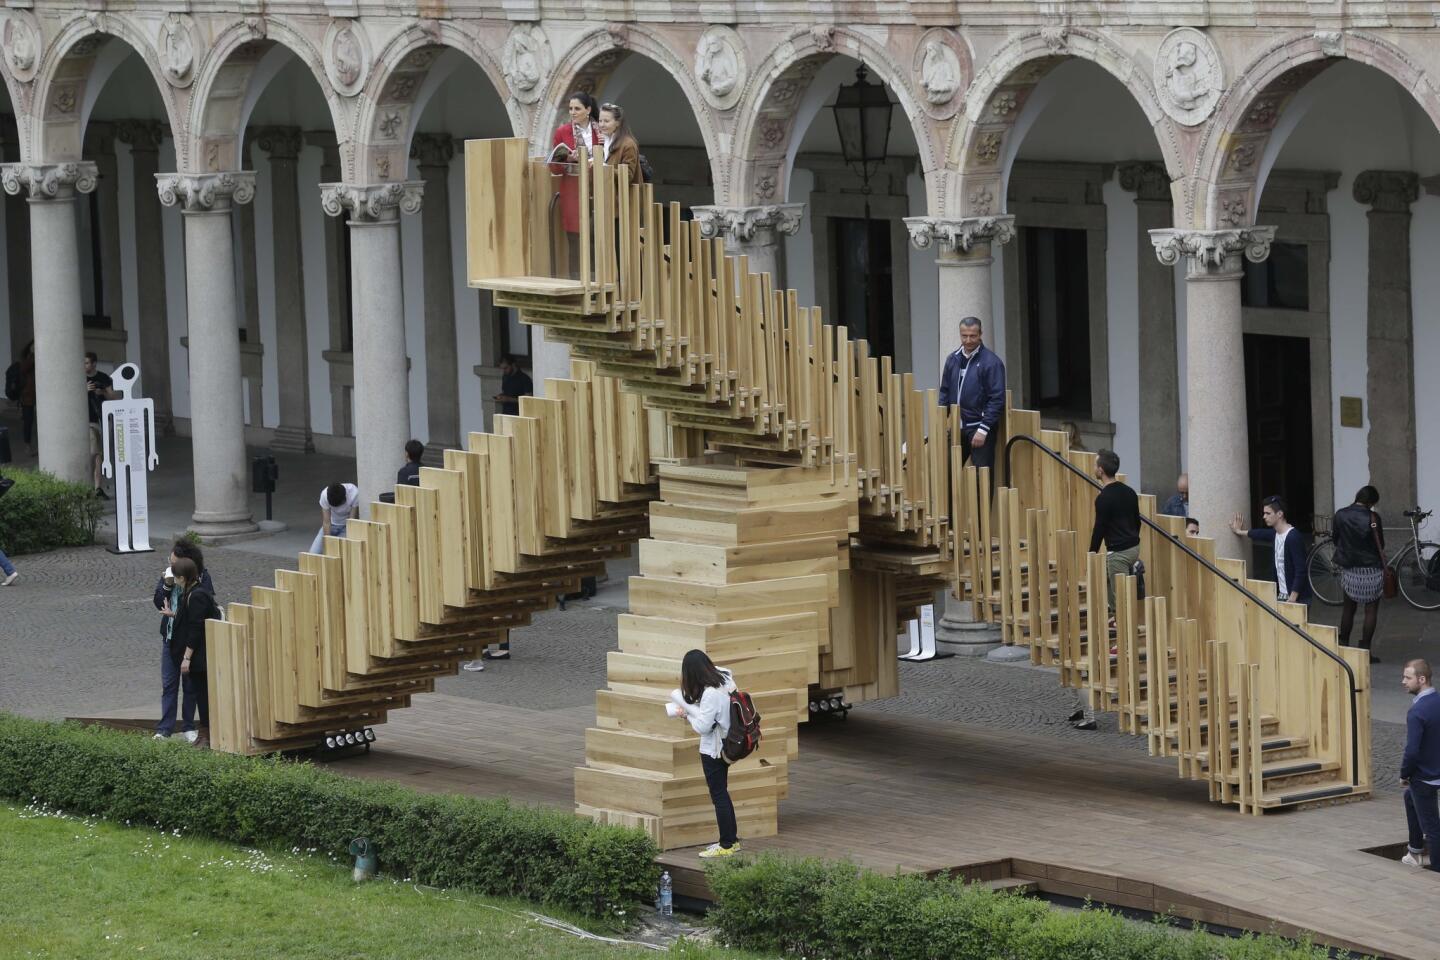 The installation "Scale Infinite" is displayed at the Milan Design Fair. The sprawling Milan furniture show is the largest and most prestigious in the world, capitalizing on Italian excellence in furniture design and craftsmanship.